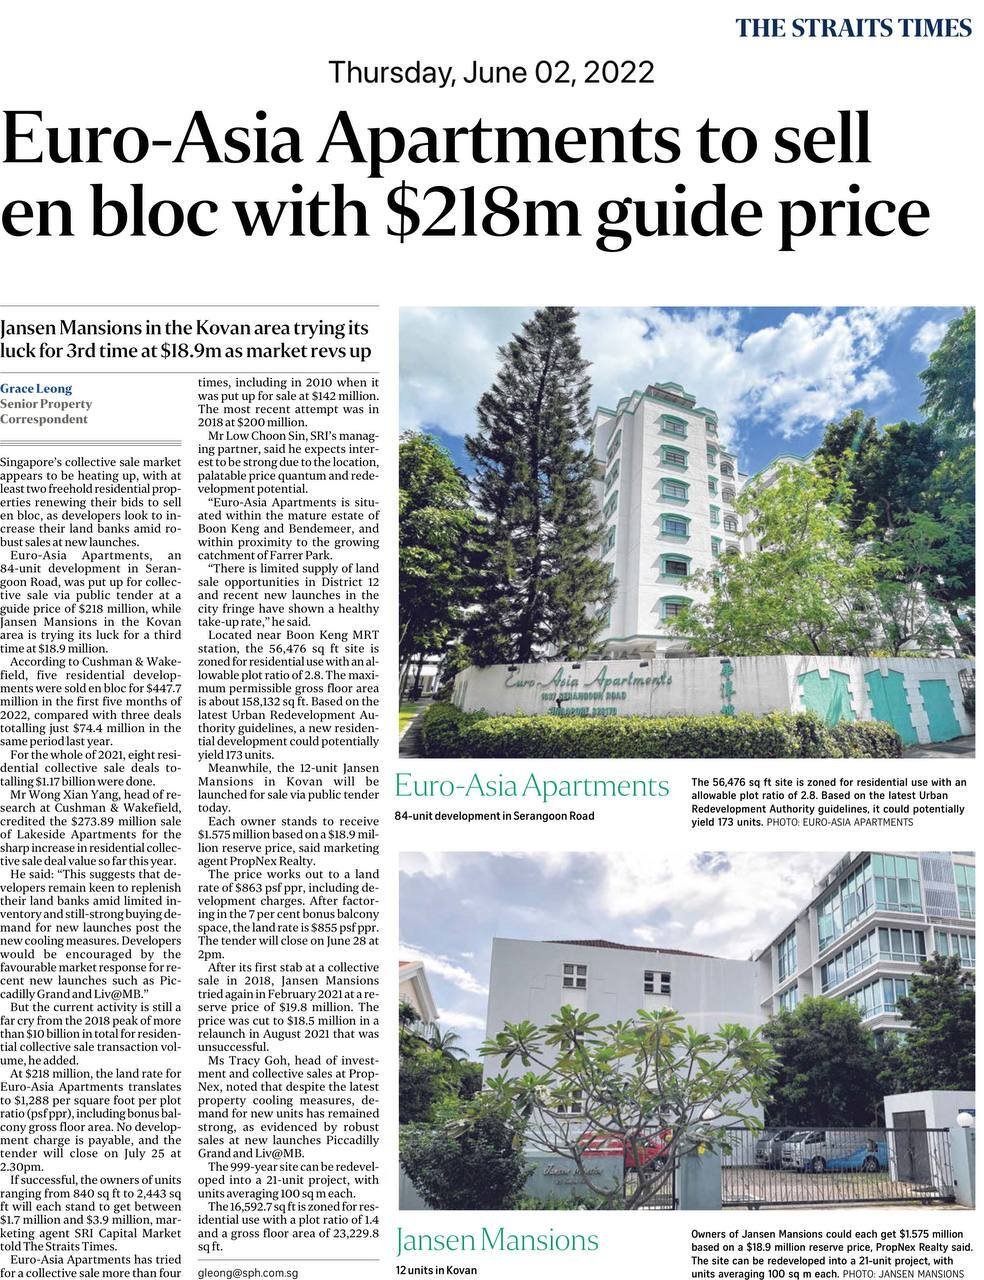 ST 2 Jun 2022 - Euro-Asia Apartments to sell en bloc with $218m guide price